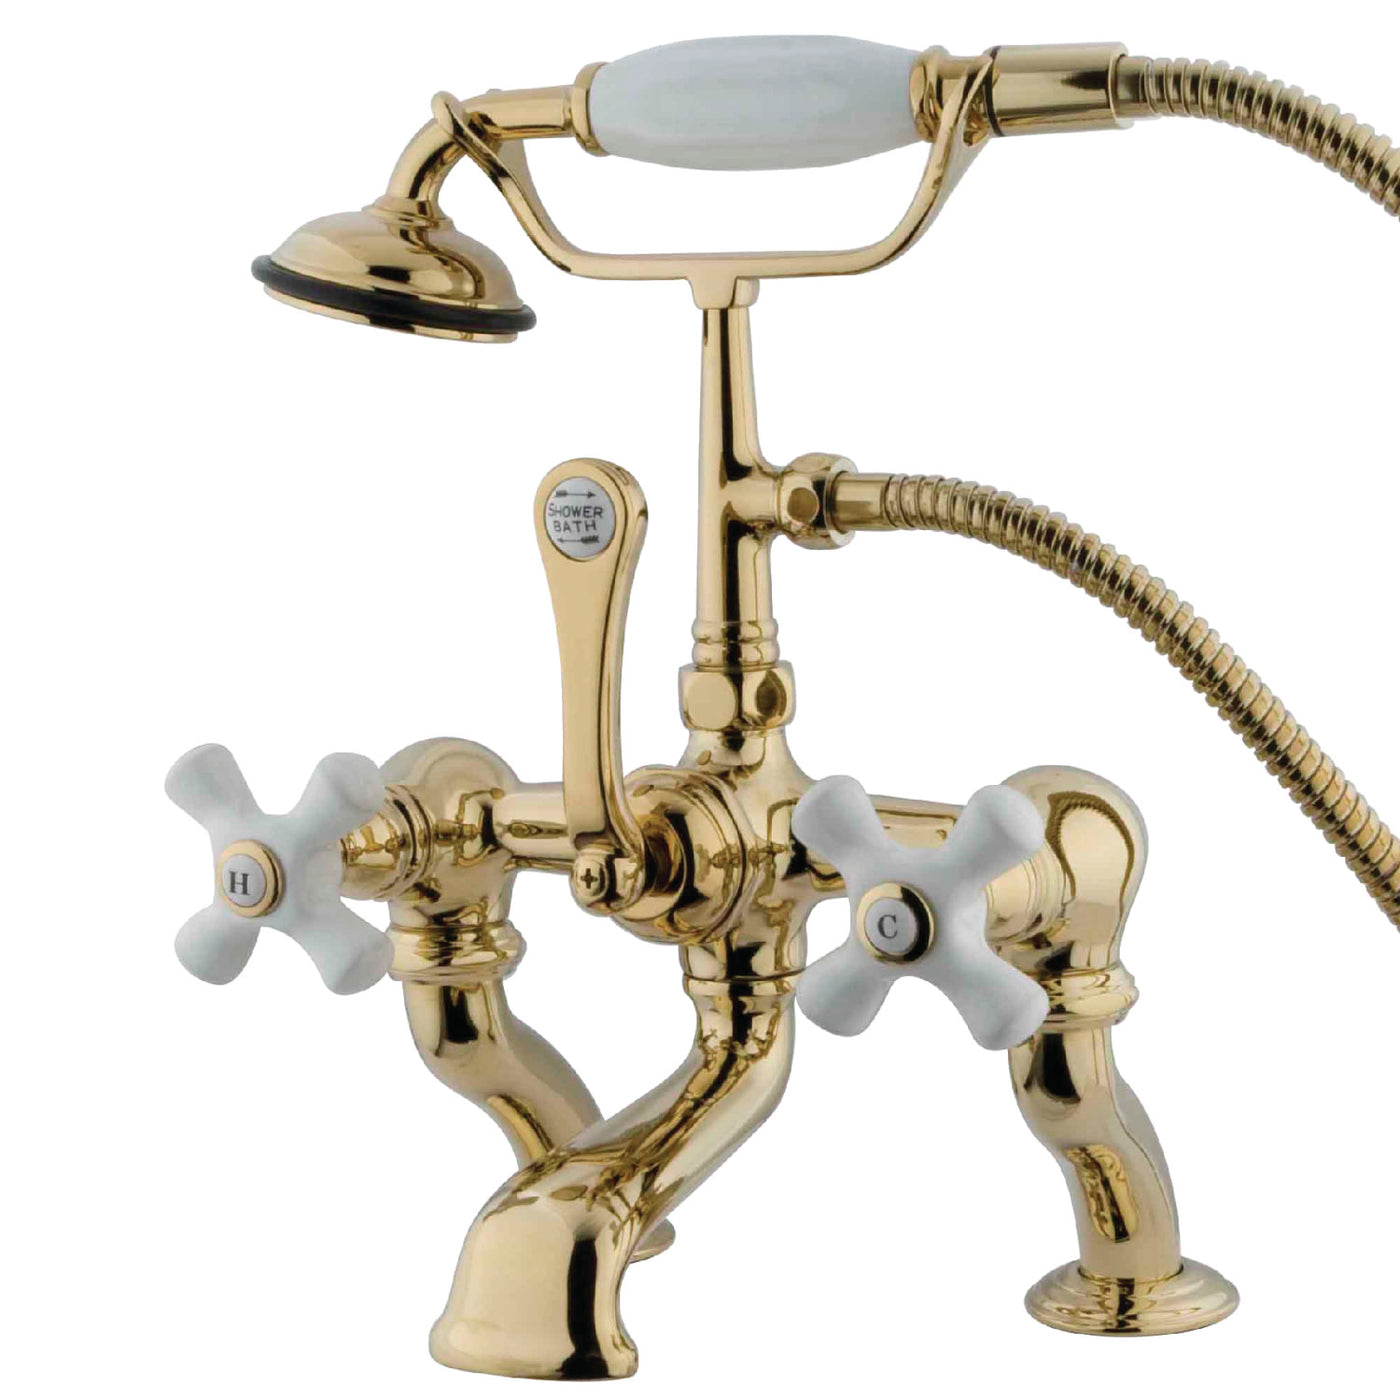 Elements of Design DT4092PX 7-Inch Deck Mount Tub Faucet with Hand Shower, Polished Brass